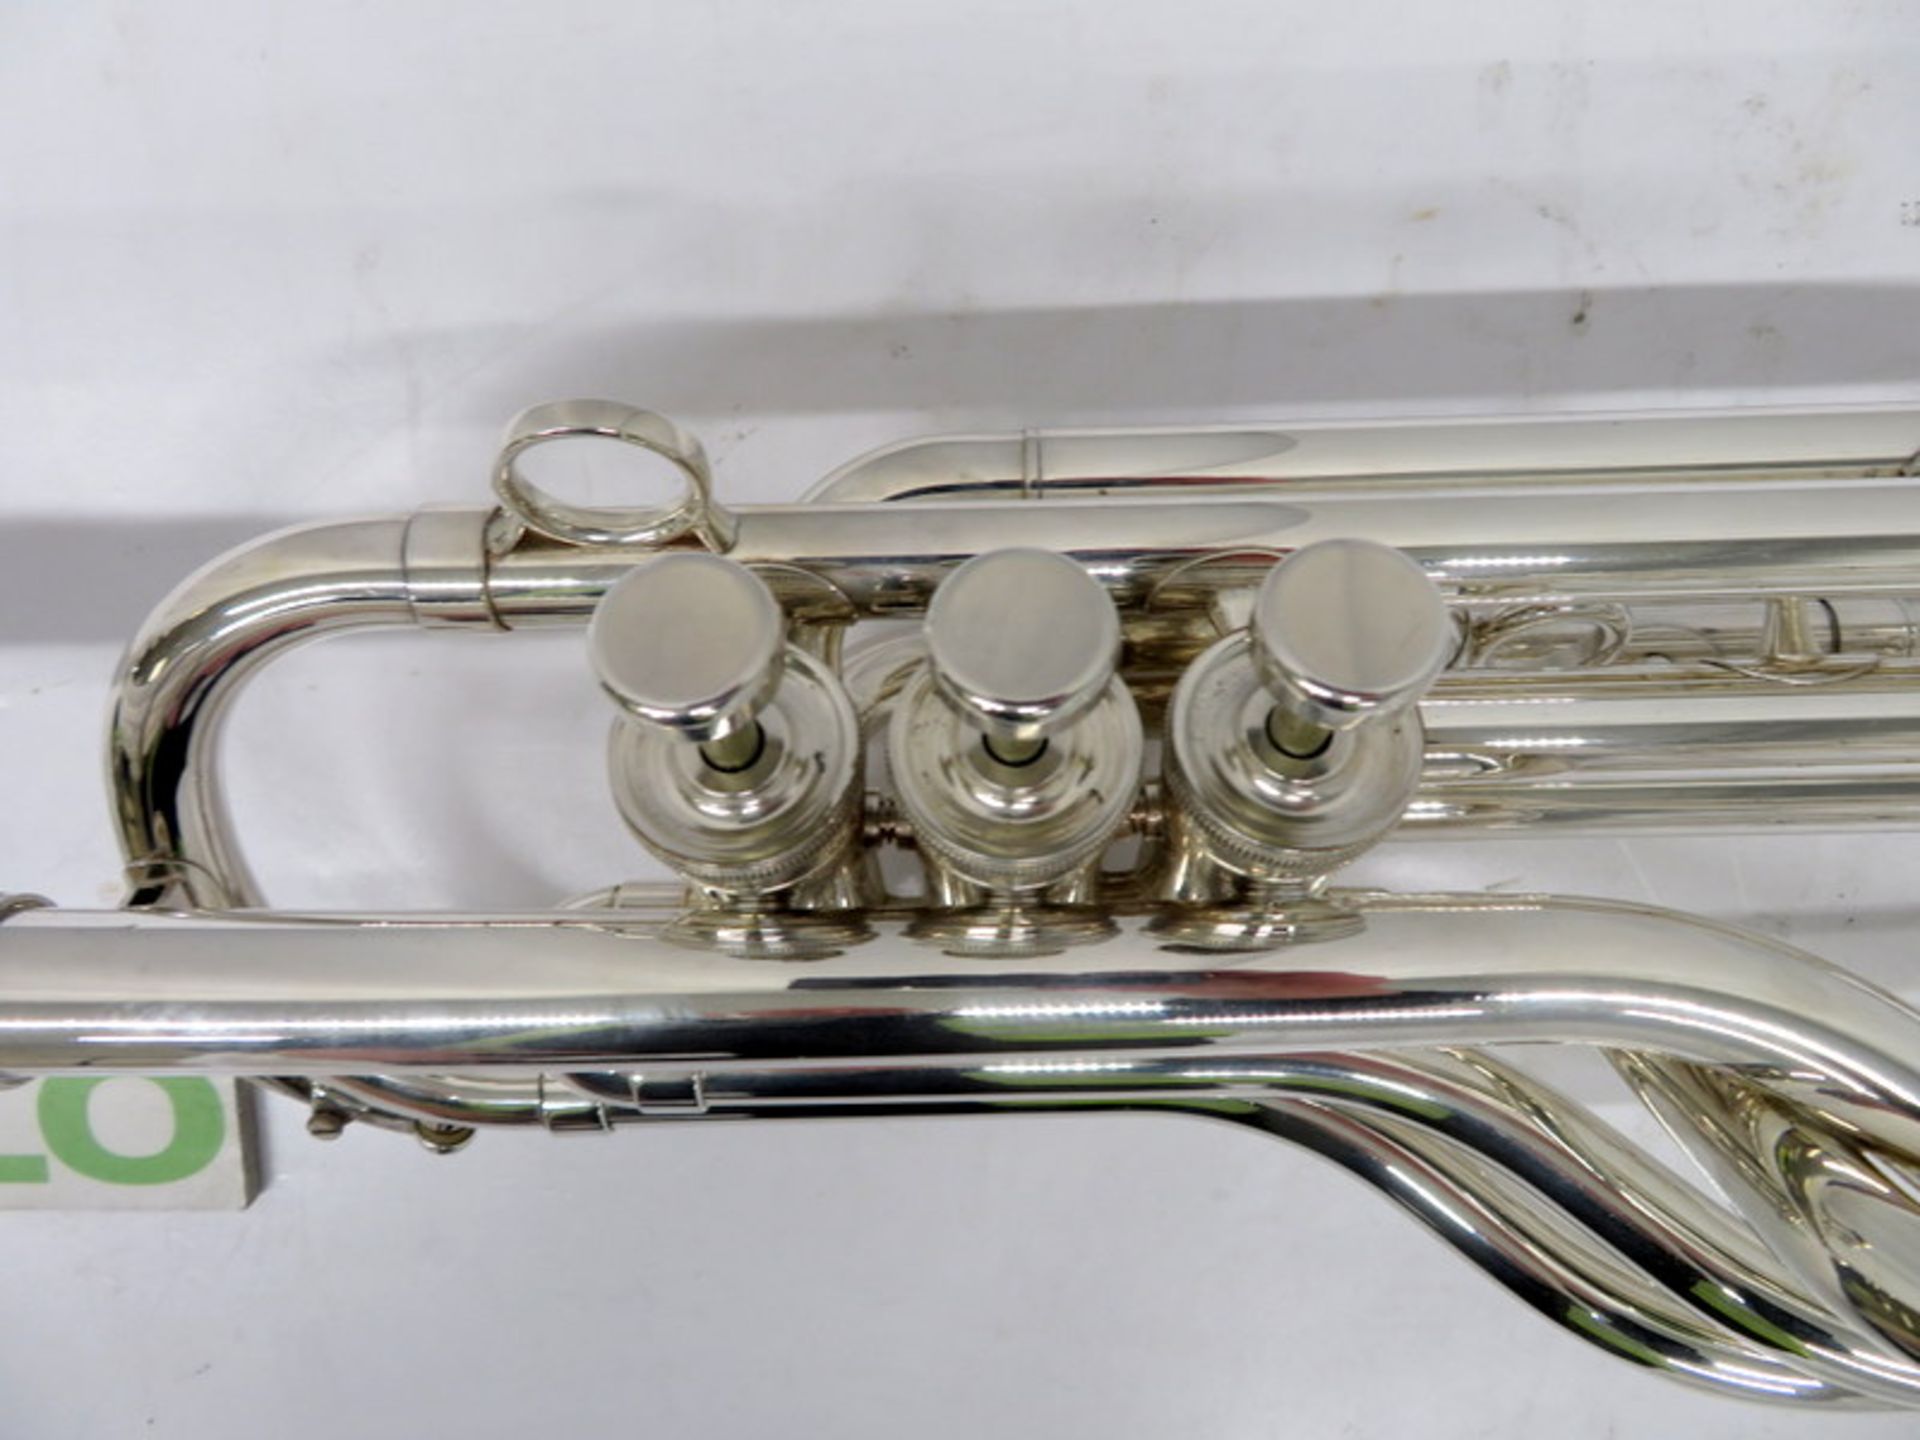 Besson 708 Fanfare Trumpet With Case. Serial Number: 838496. Please Note This Item Has Not - Image 7 of 17